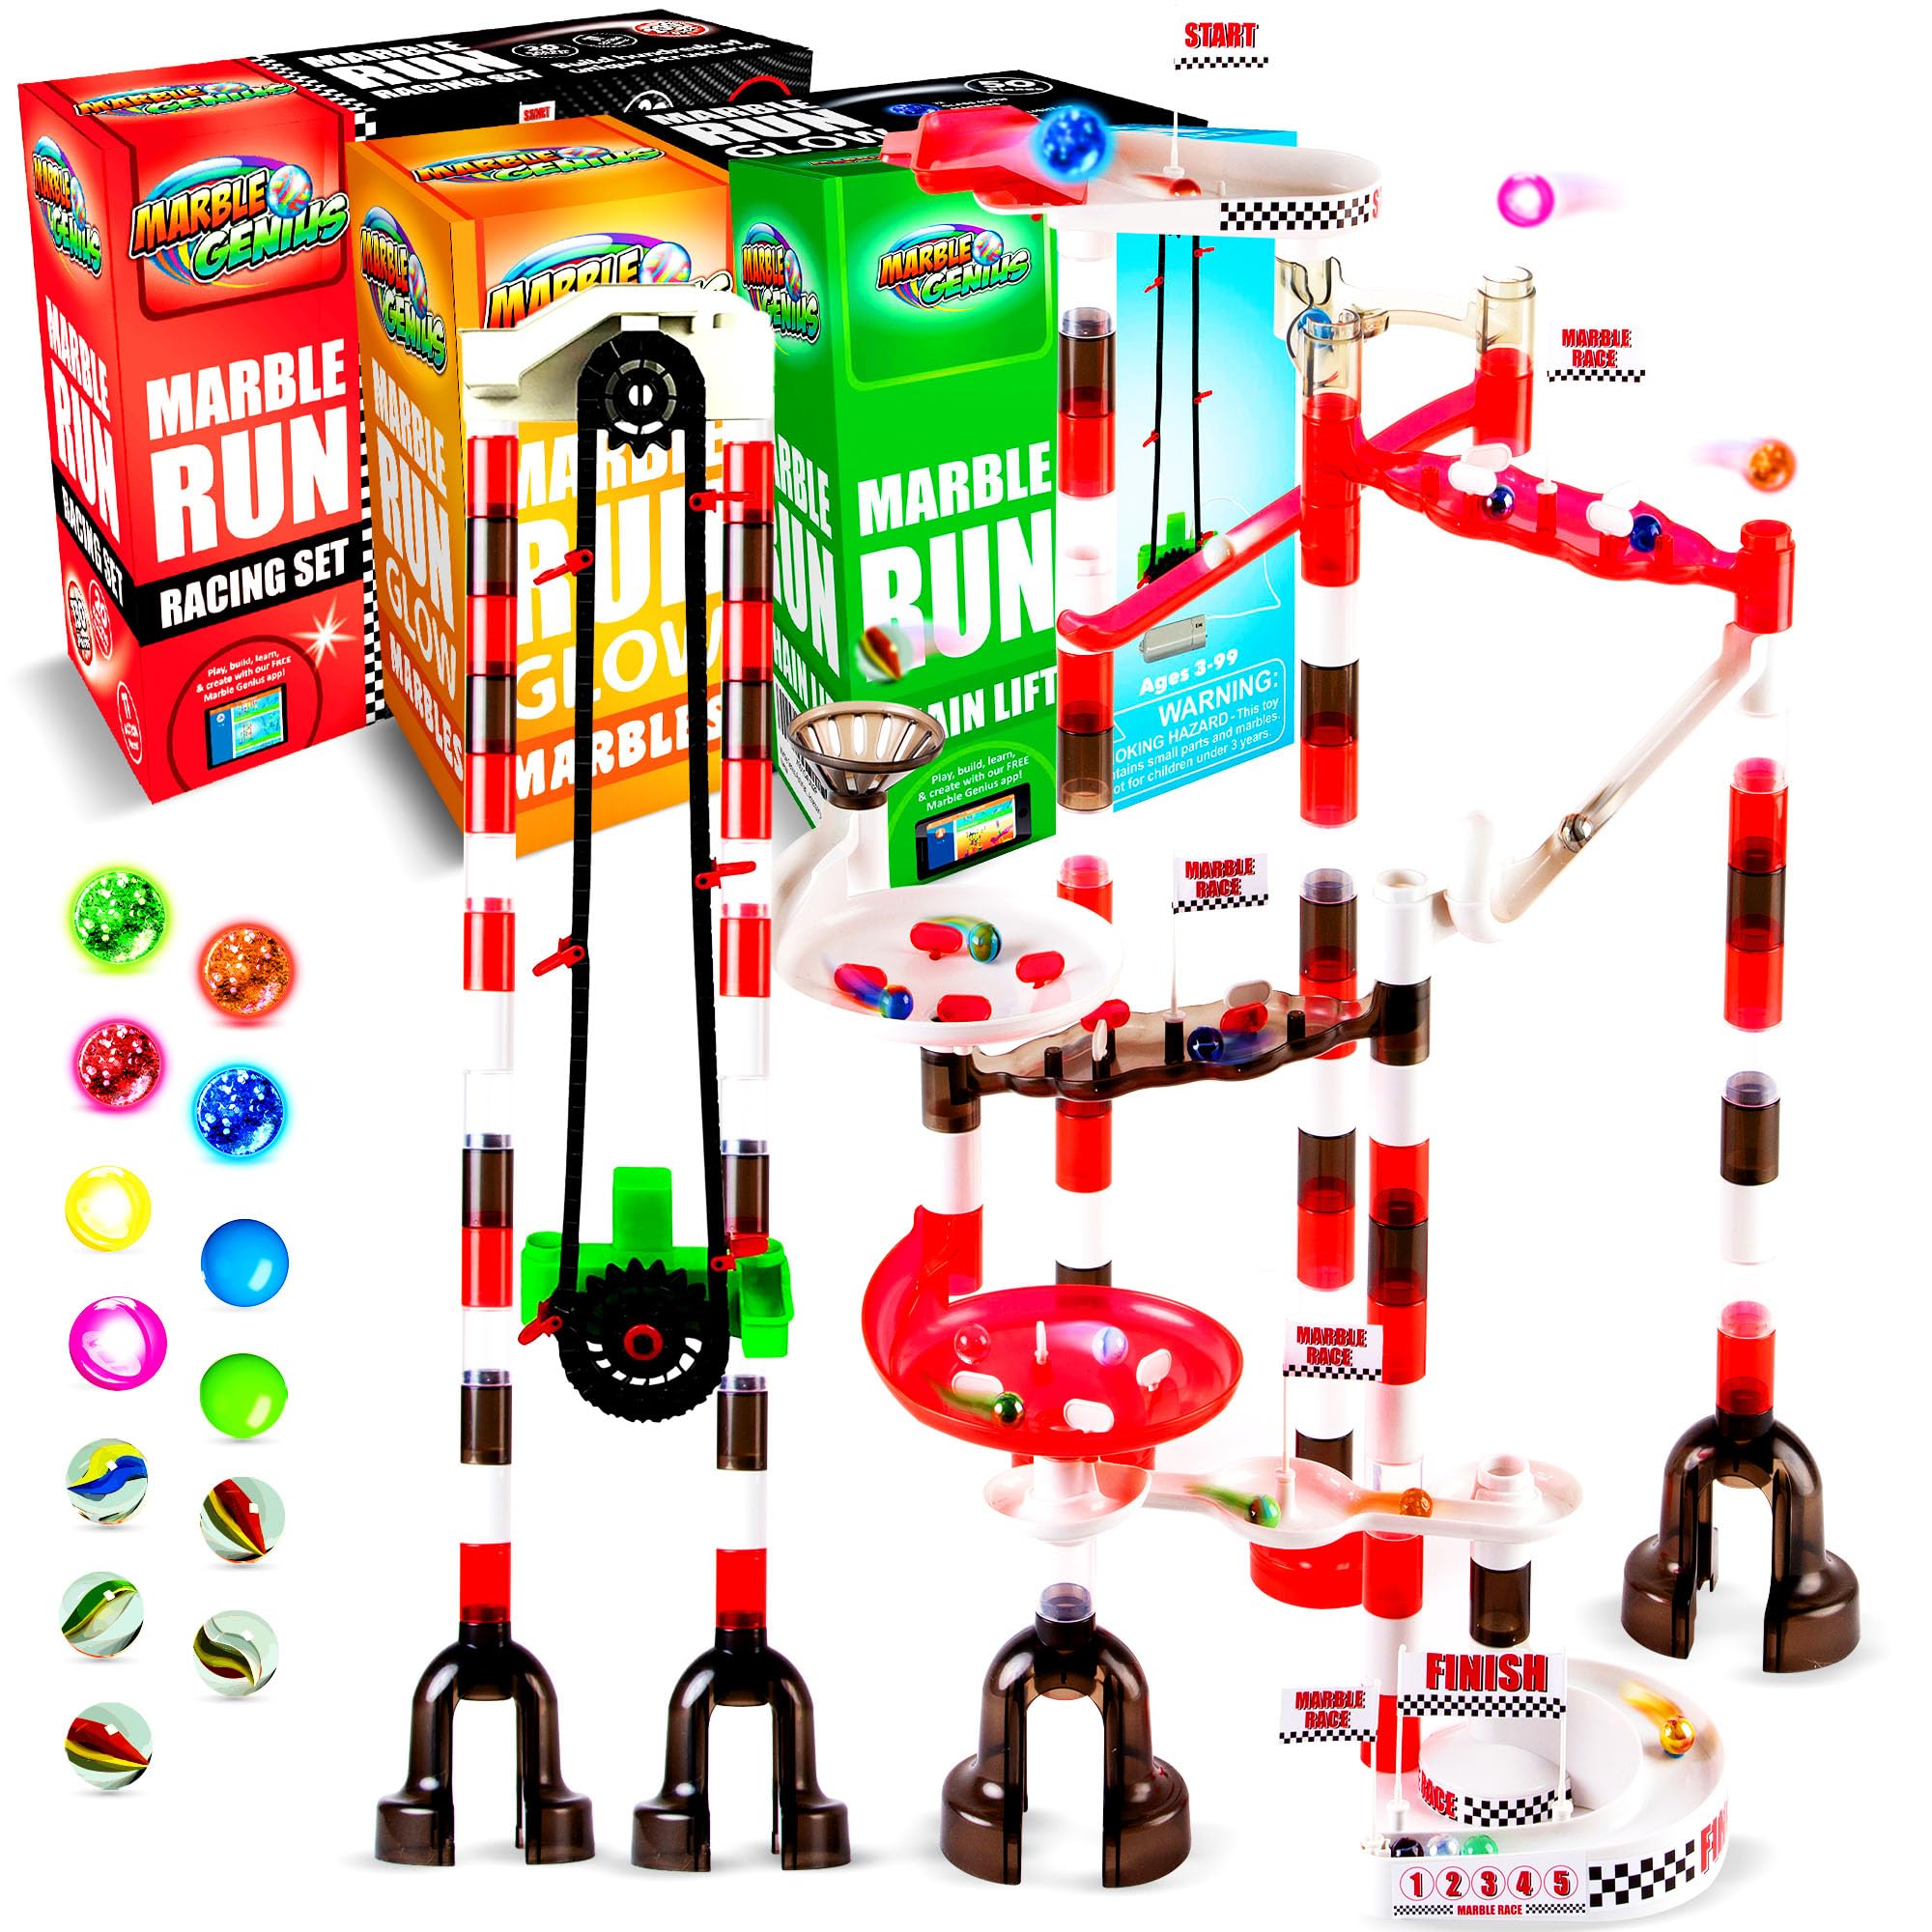 Marble Genius Bundle: Marble Run Racing Set (200 Pieces), Marble Glow Run Race Track Set Glow in The Dark (50 Pieces), Automatic Chain Lift, STEM Educational Building Block Toy